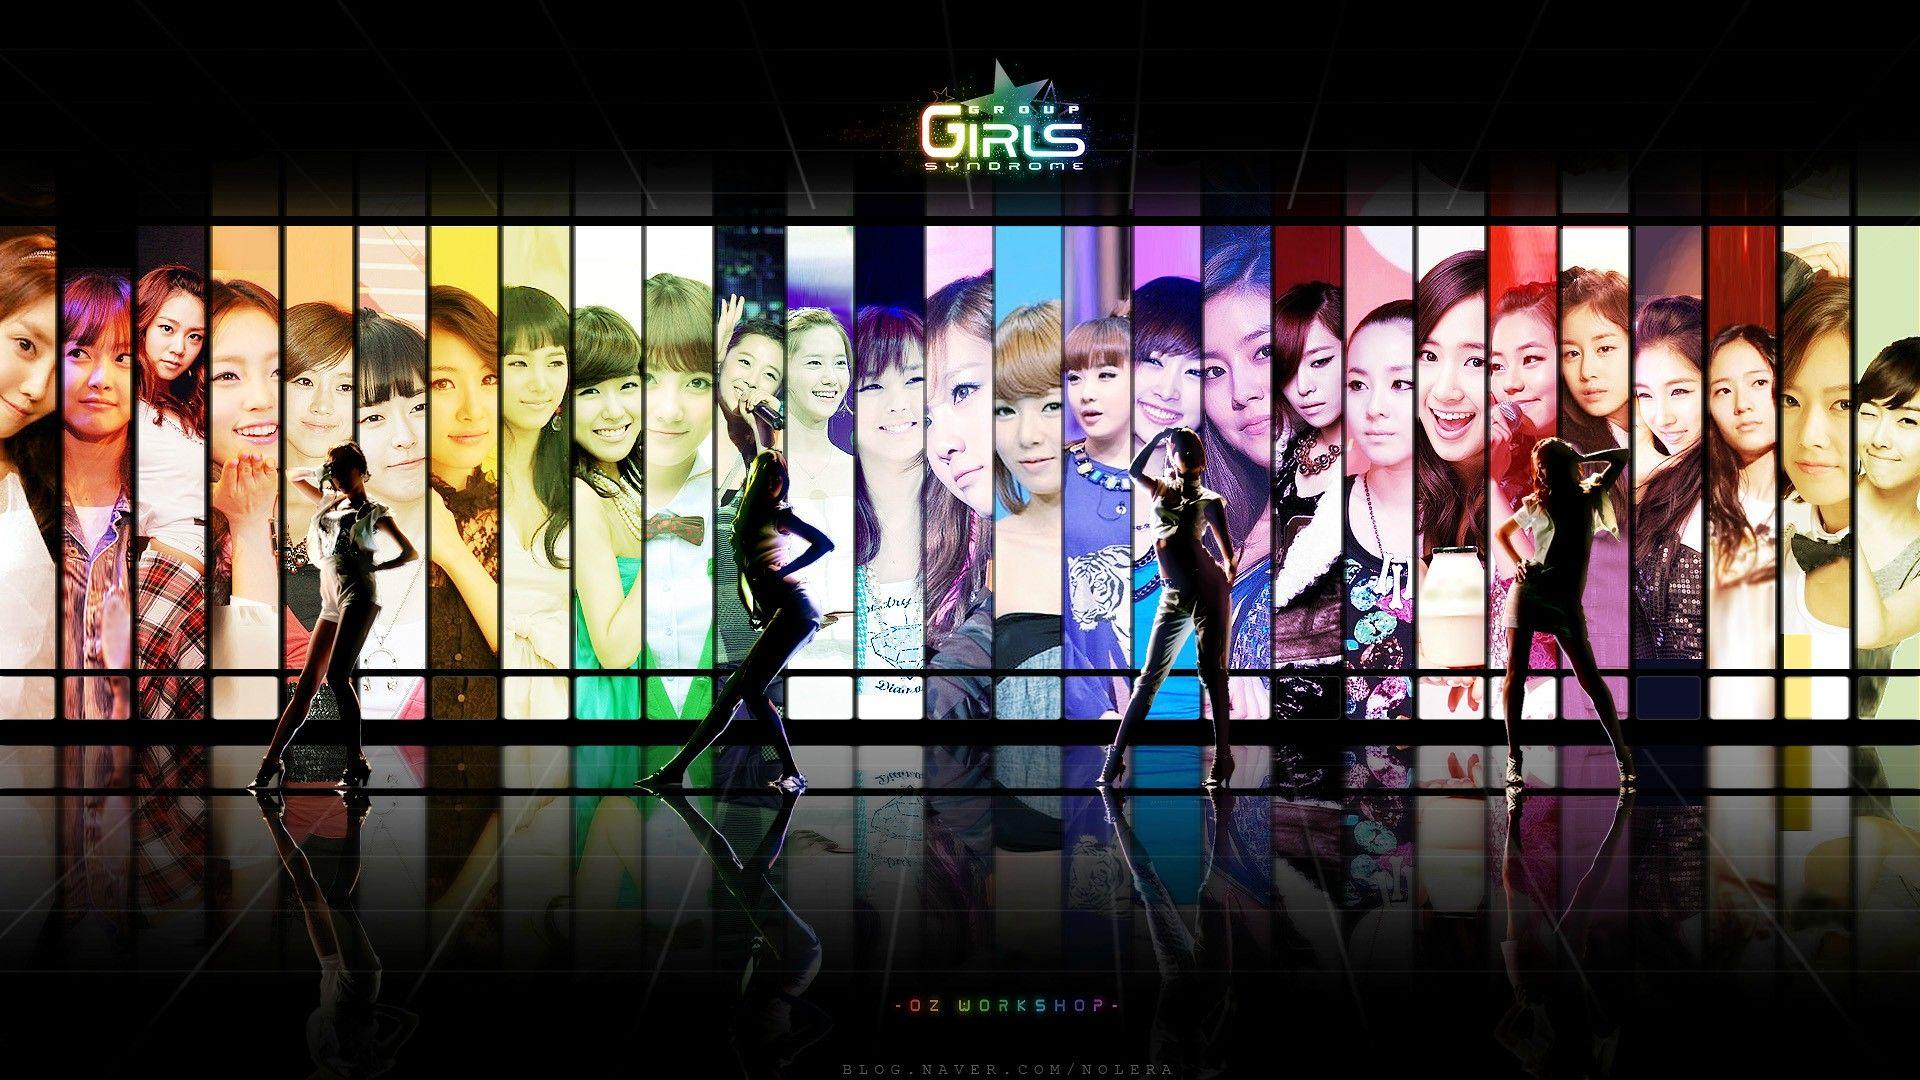 Any other kpop wallpaper? (Preferably girl groups)